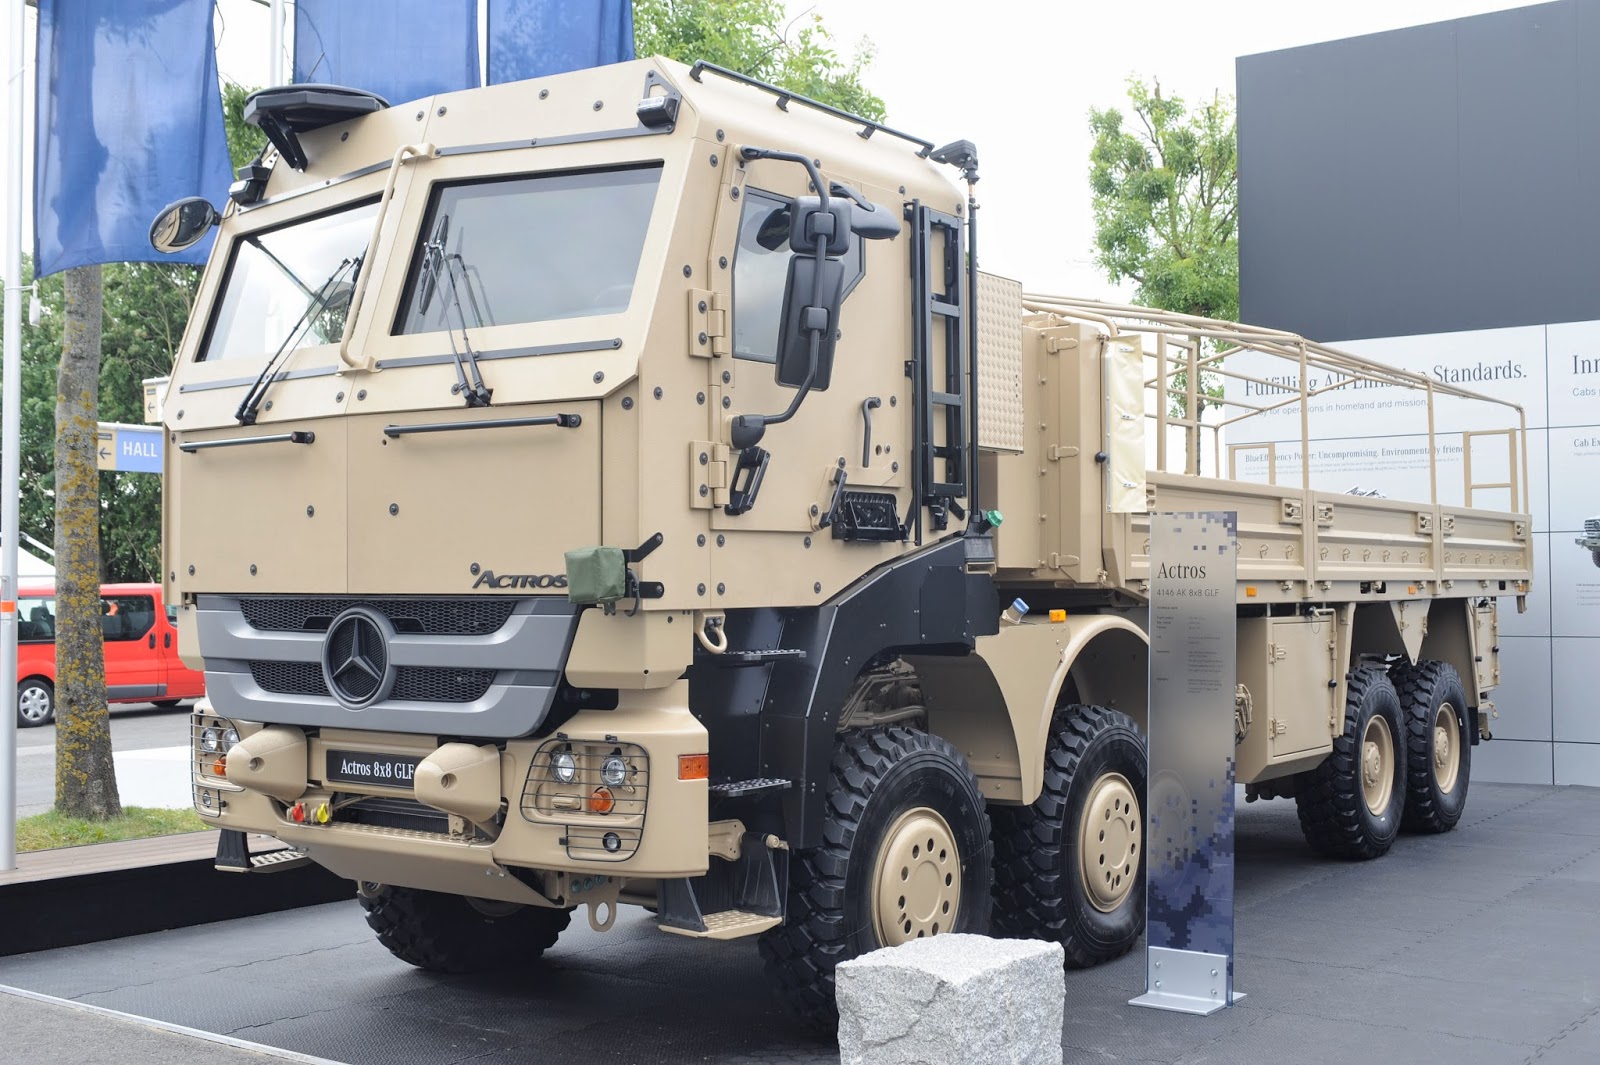 Powerful Military Trucks for Transport and Defense